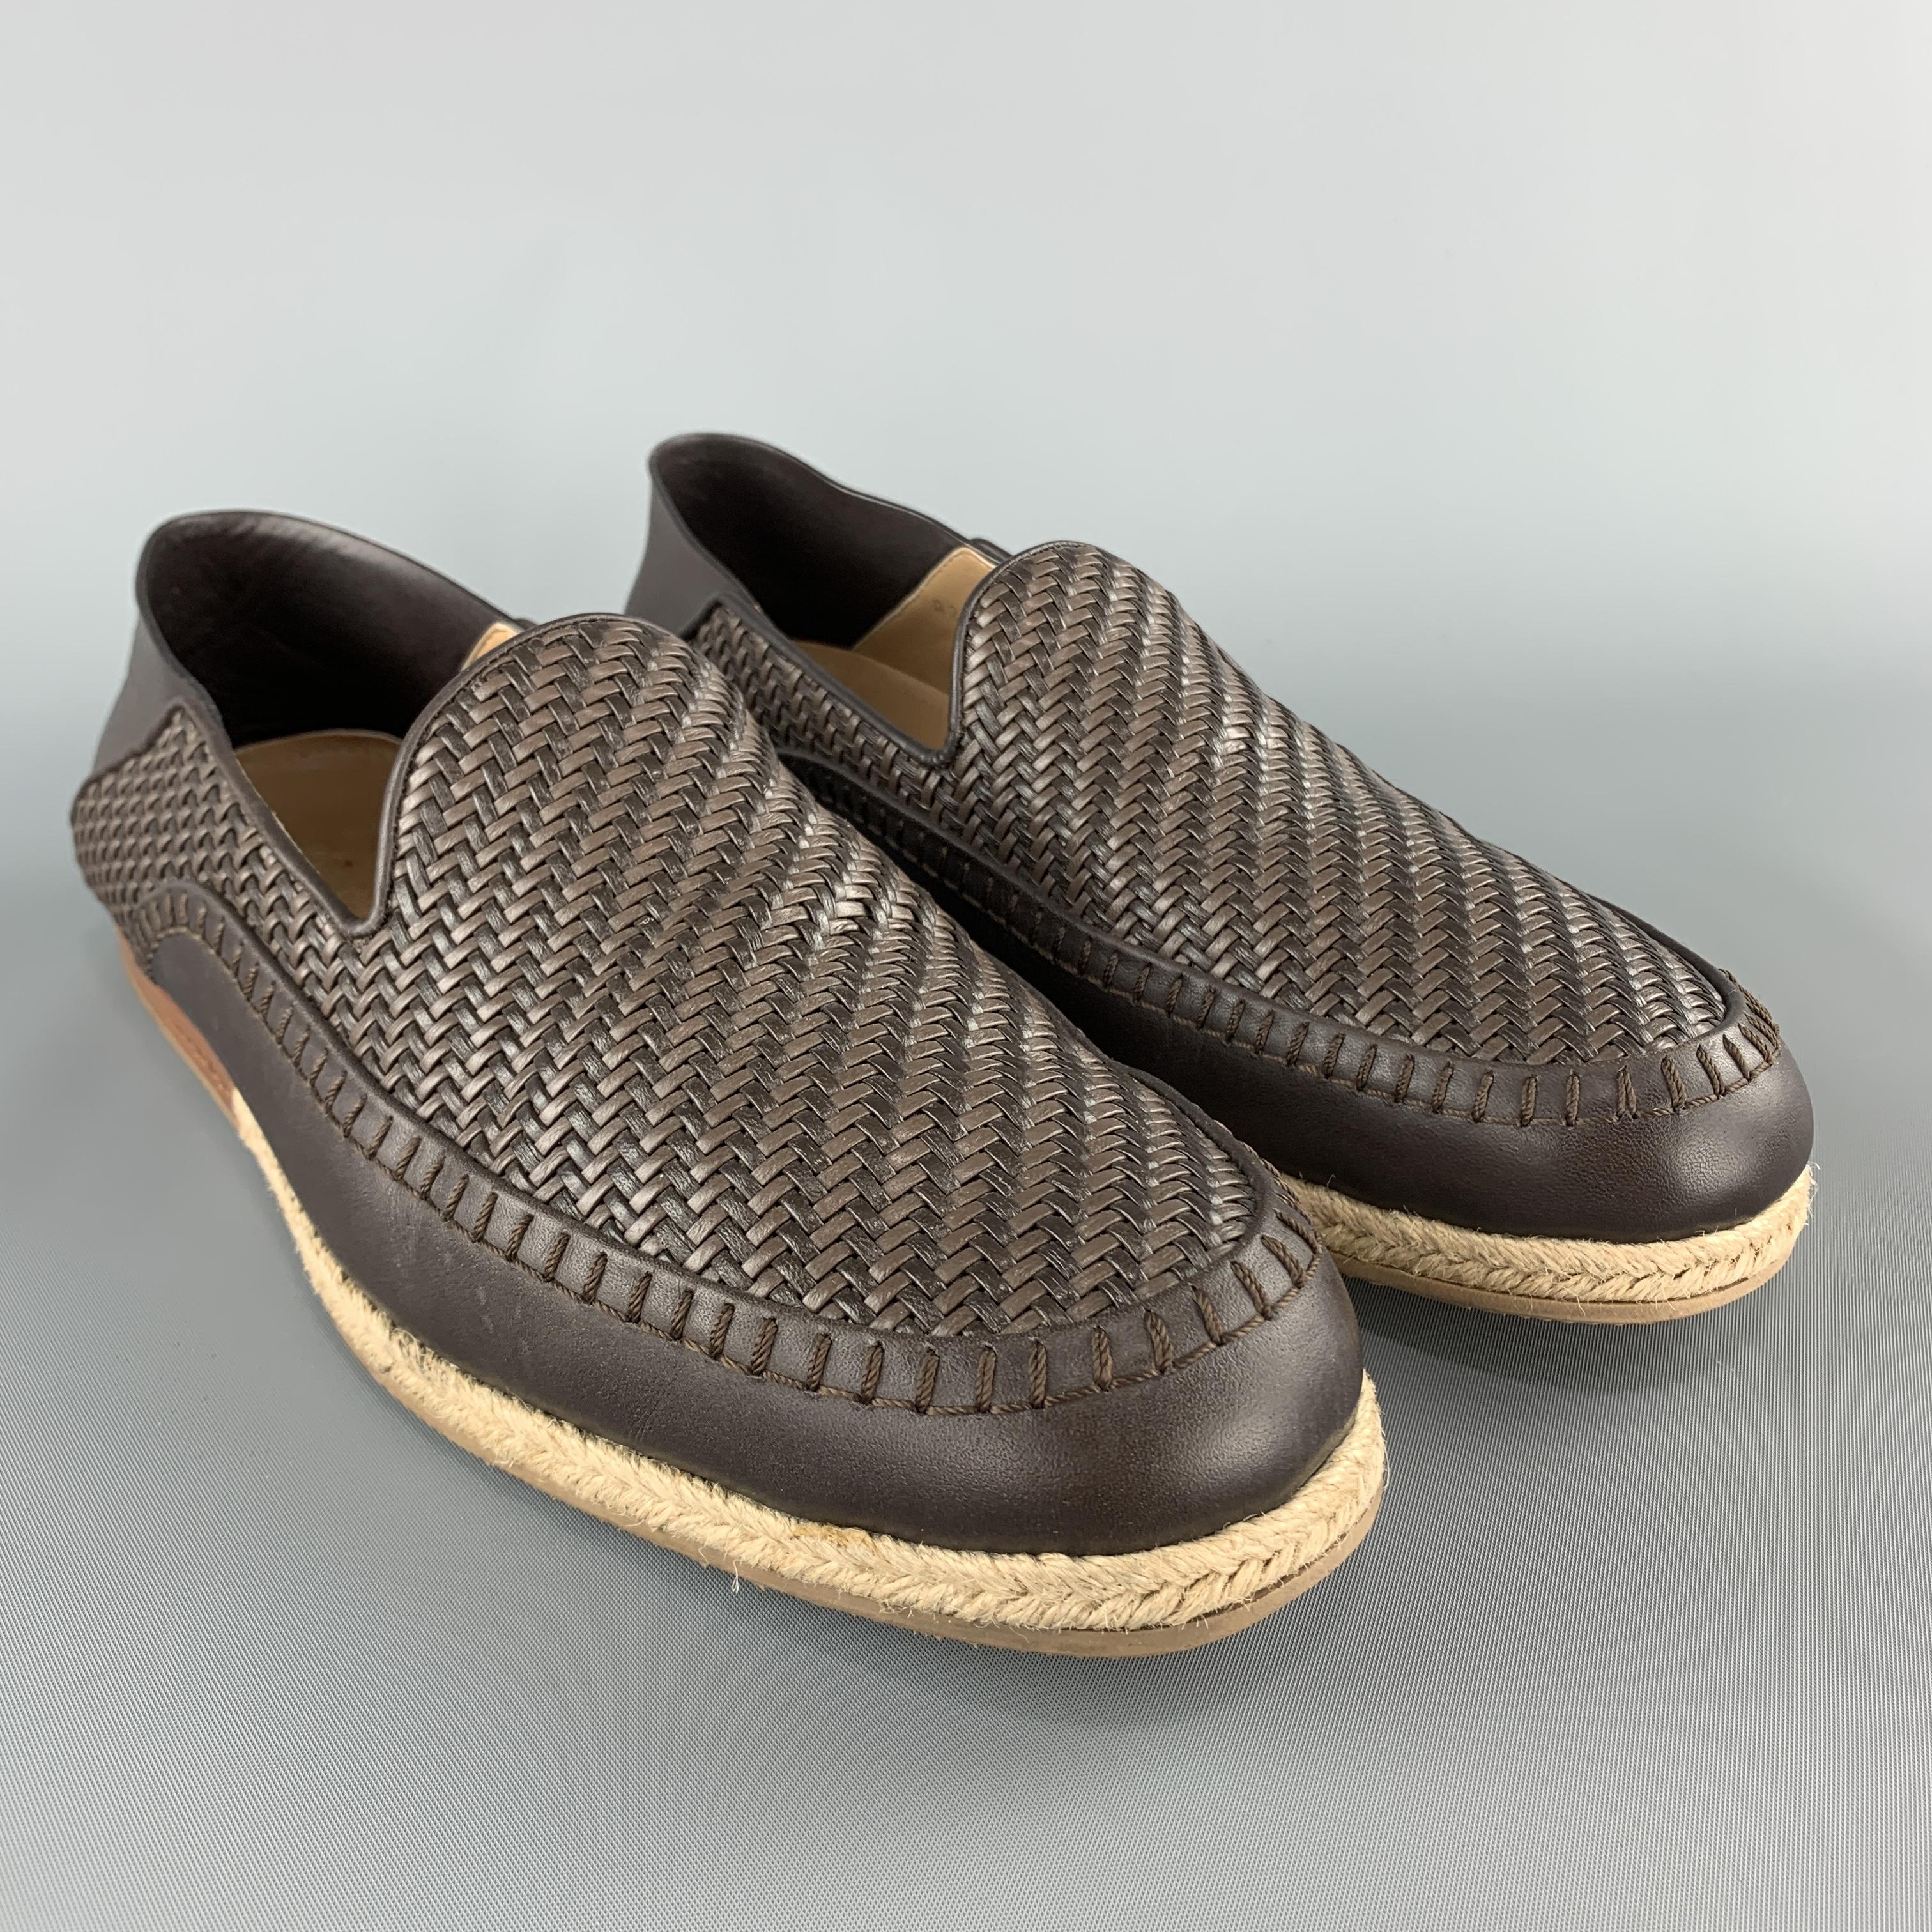 ERMENEGILDO ZEGNA loafers come in brown leather with a woven apron te panel, top stitching, and braided rope details sole. Made in Italy.

Excellent Pre-Owned Condition.
Marked: UK 9

Outsole: 11.5 x 4 in